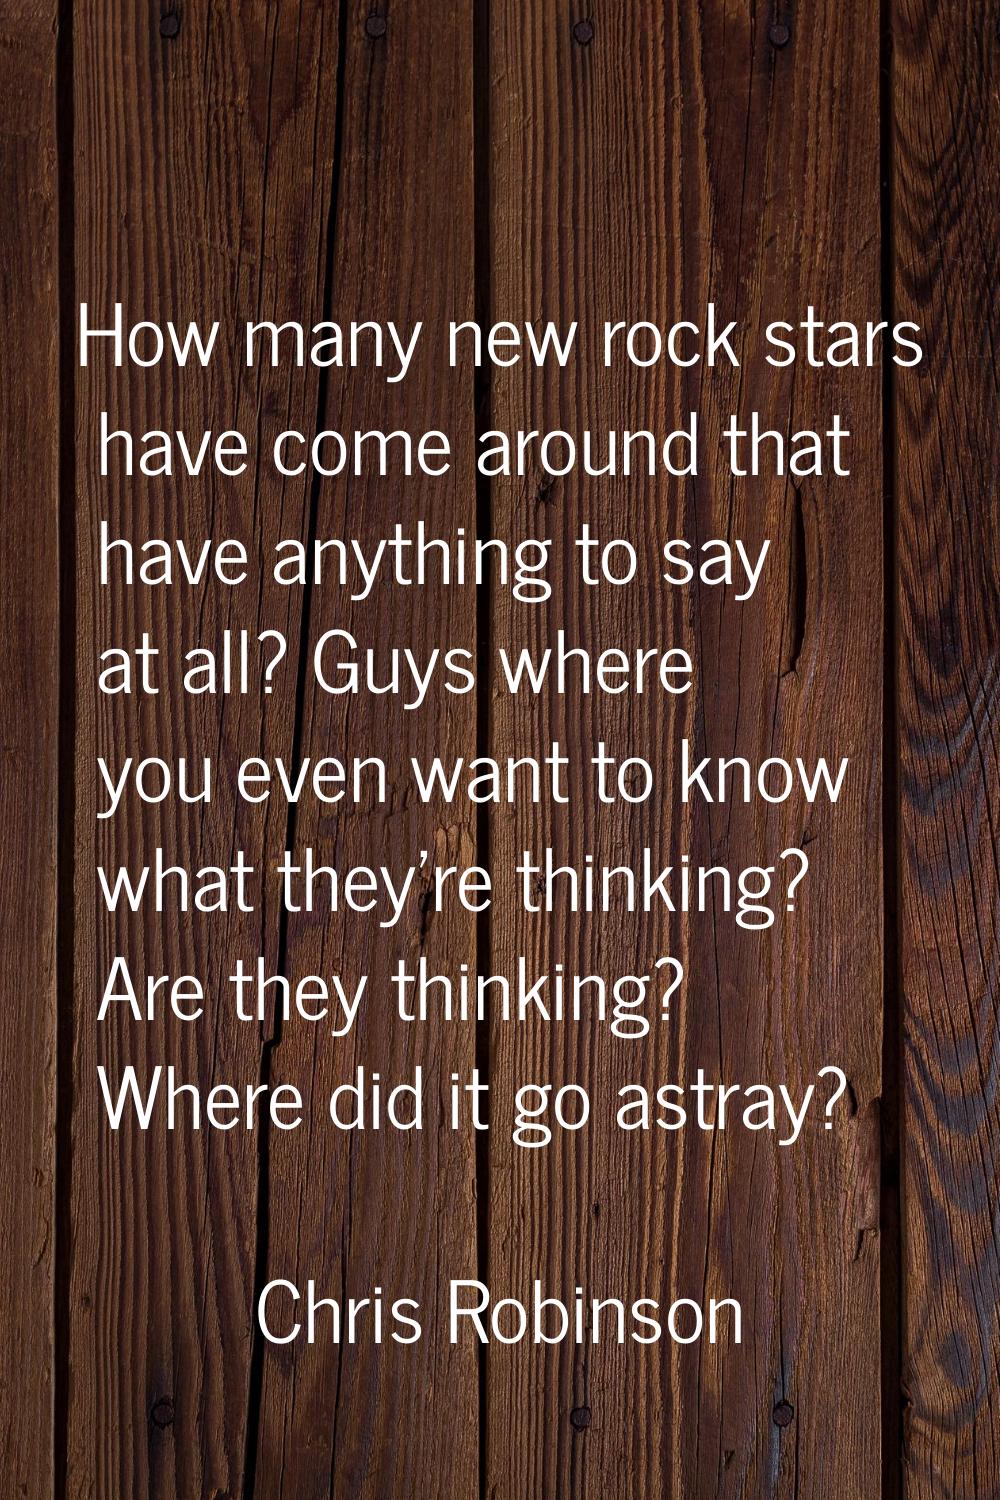 How many new rock stars have come around that have anything to say at all? Guys where you even want